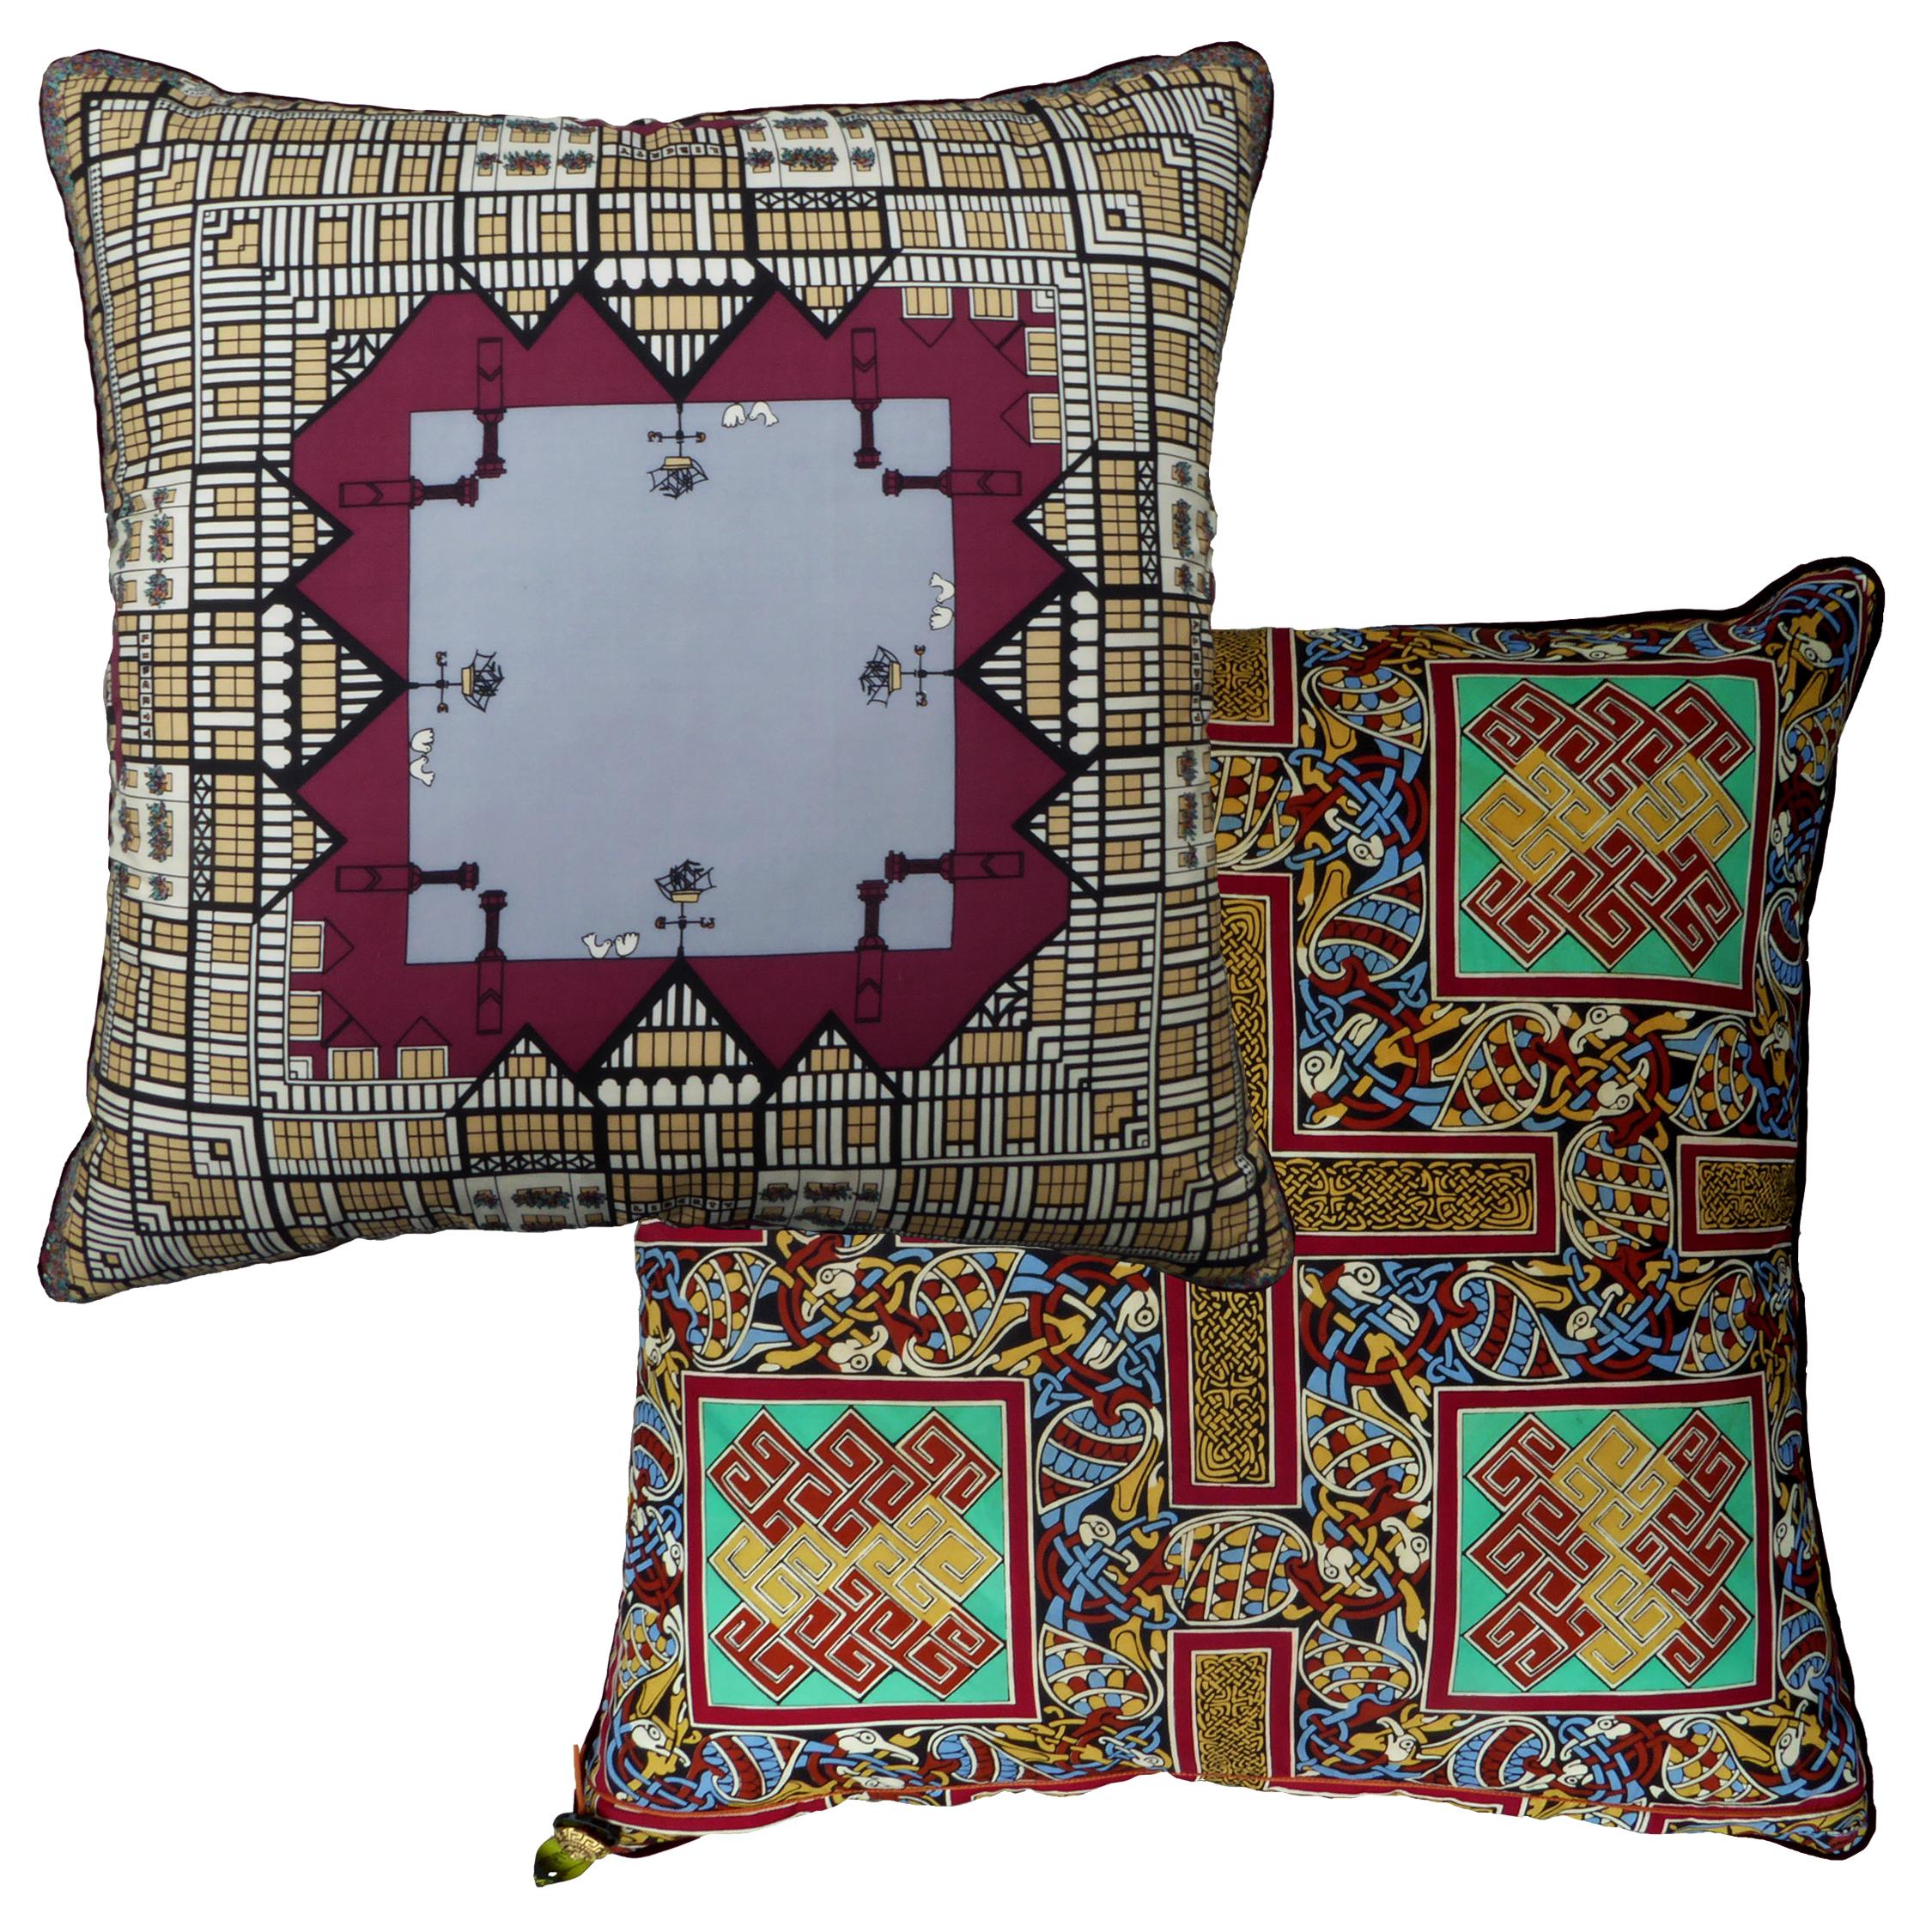 Hand-Crafted Vintage Cushions Luxury Bespoke Pillow ‘The Liberty Building', Made in England